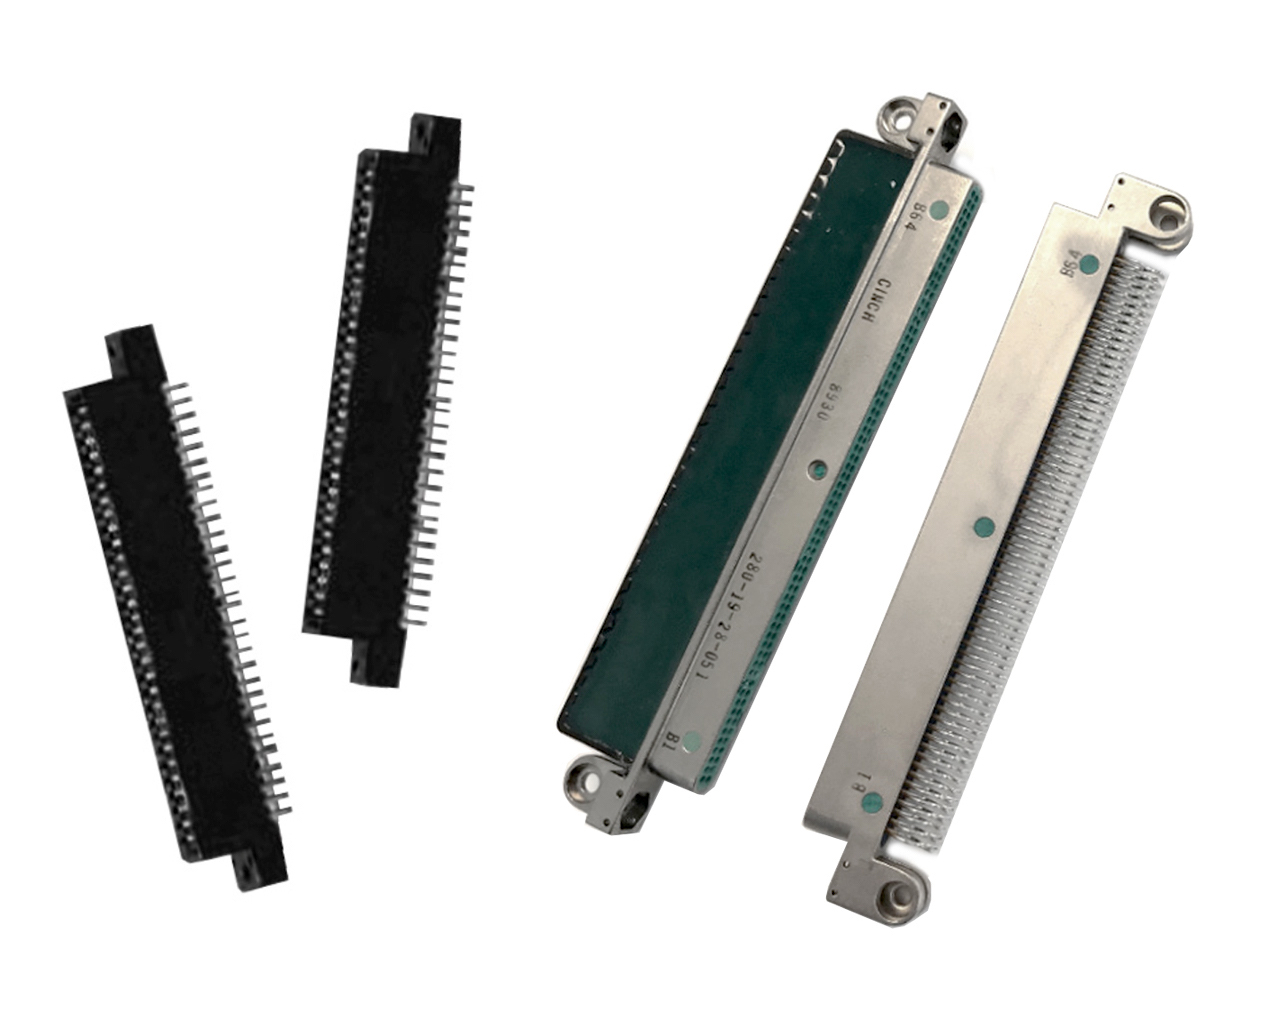 Card-edge connectors from Cinch